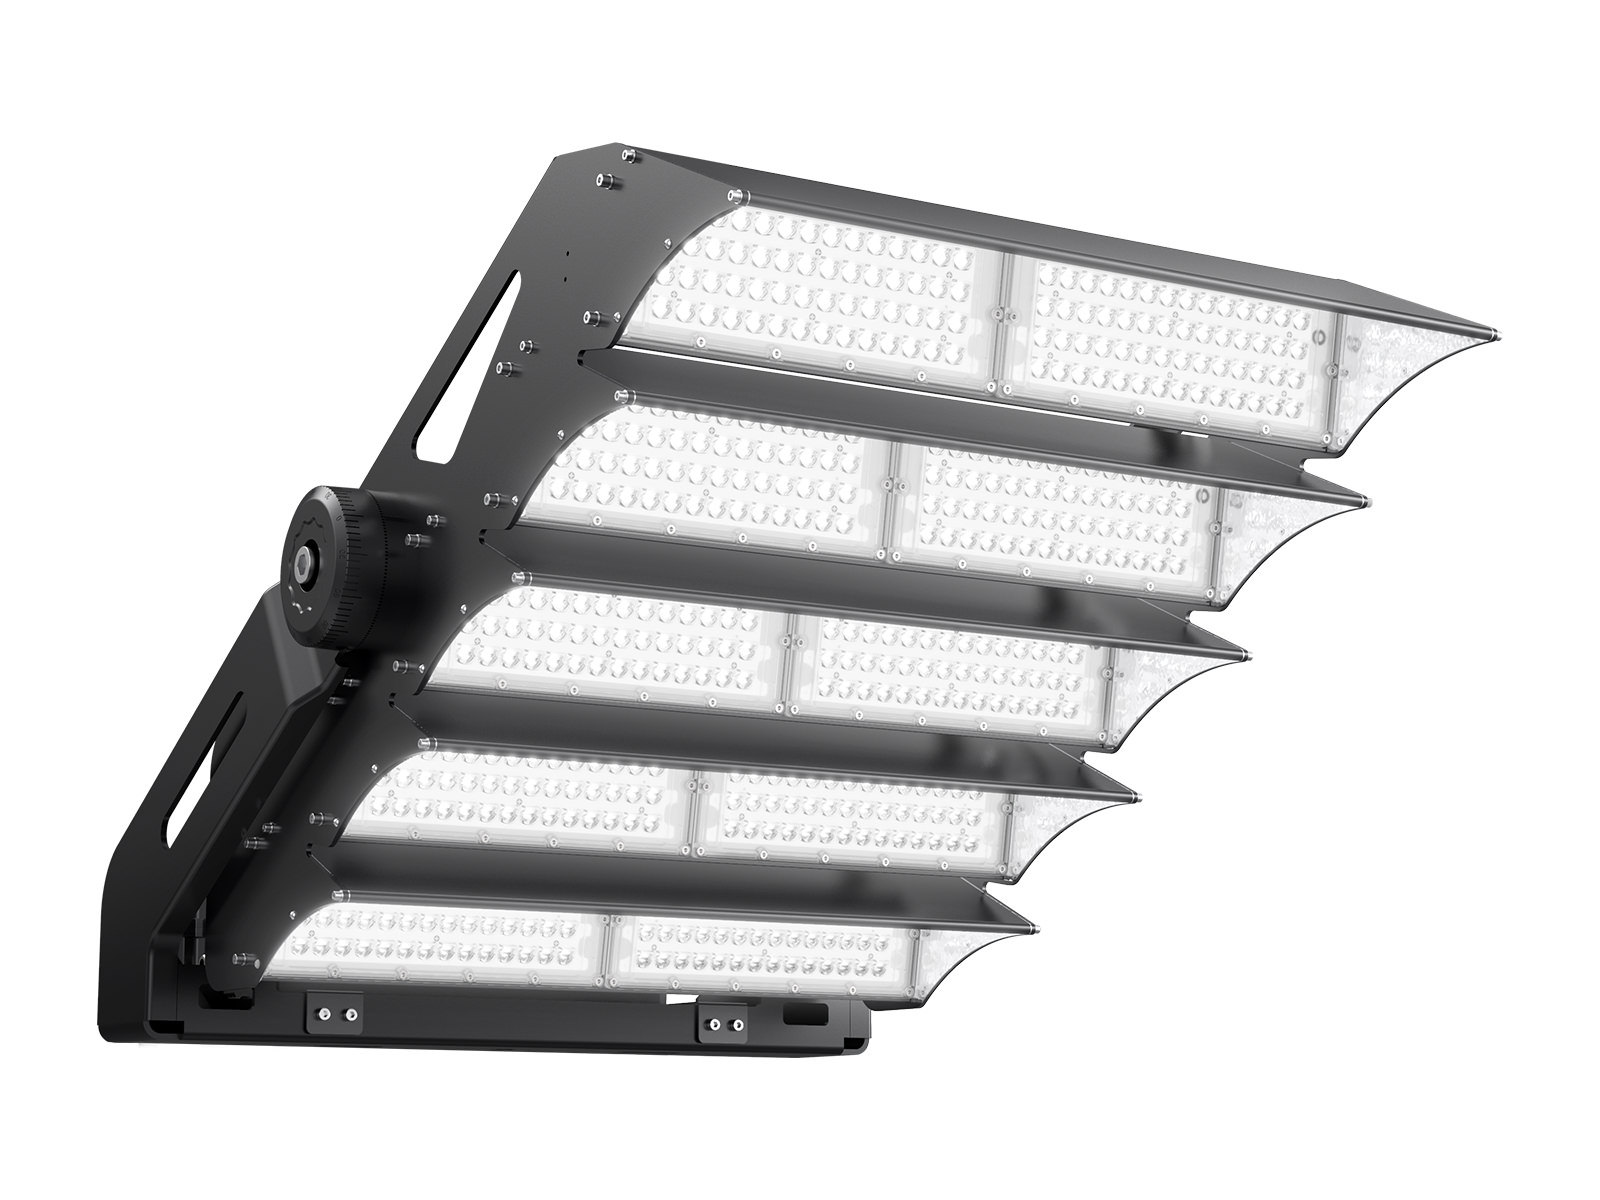 The Best-in-class Spill Light, Up-light And Glare Control 200W-2000W FL35 Sports Light